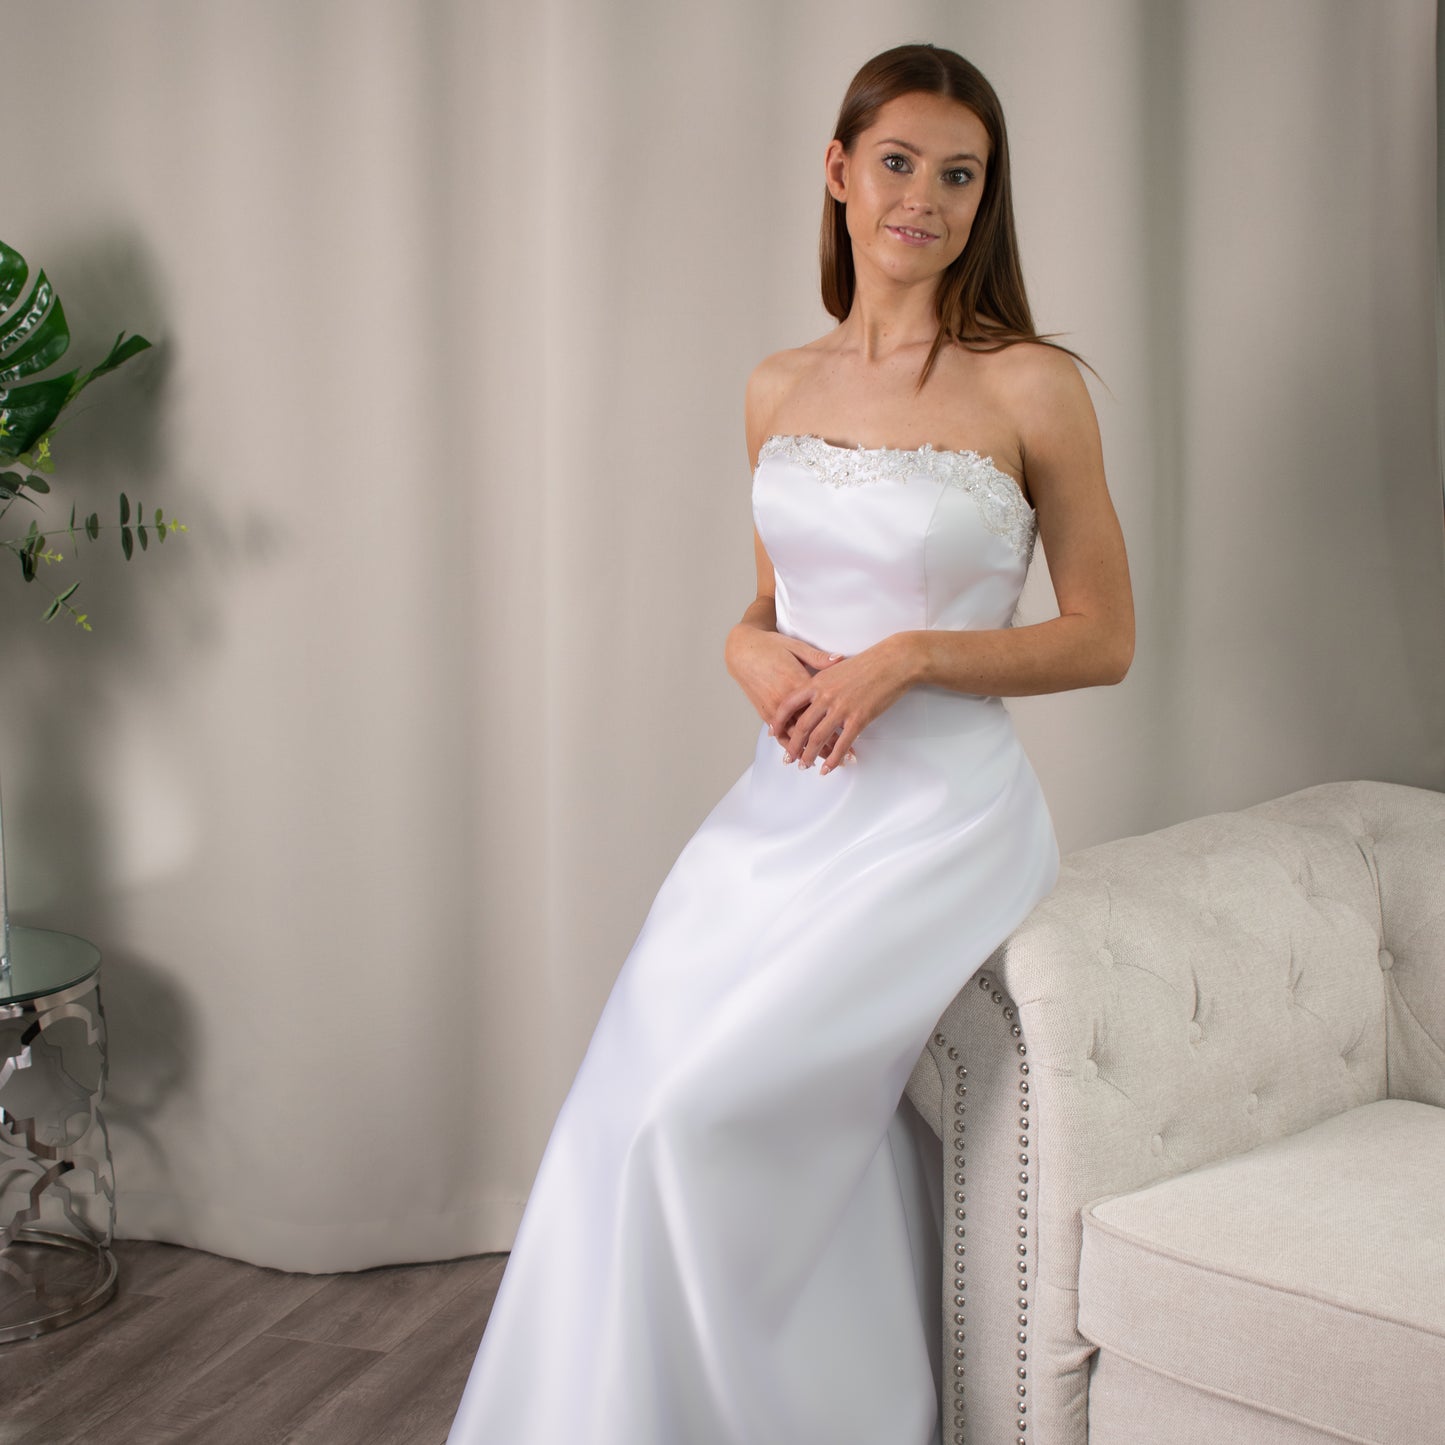 Strapless Brittany debutante dress with intricate beaded neckline and flowing A-line silhouette.